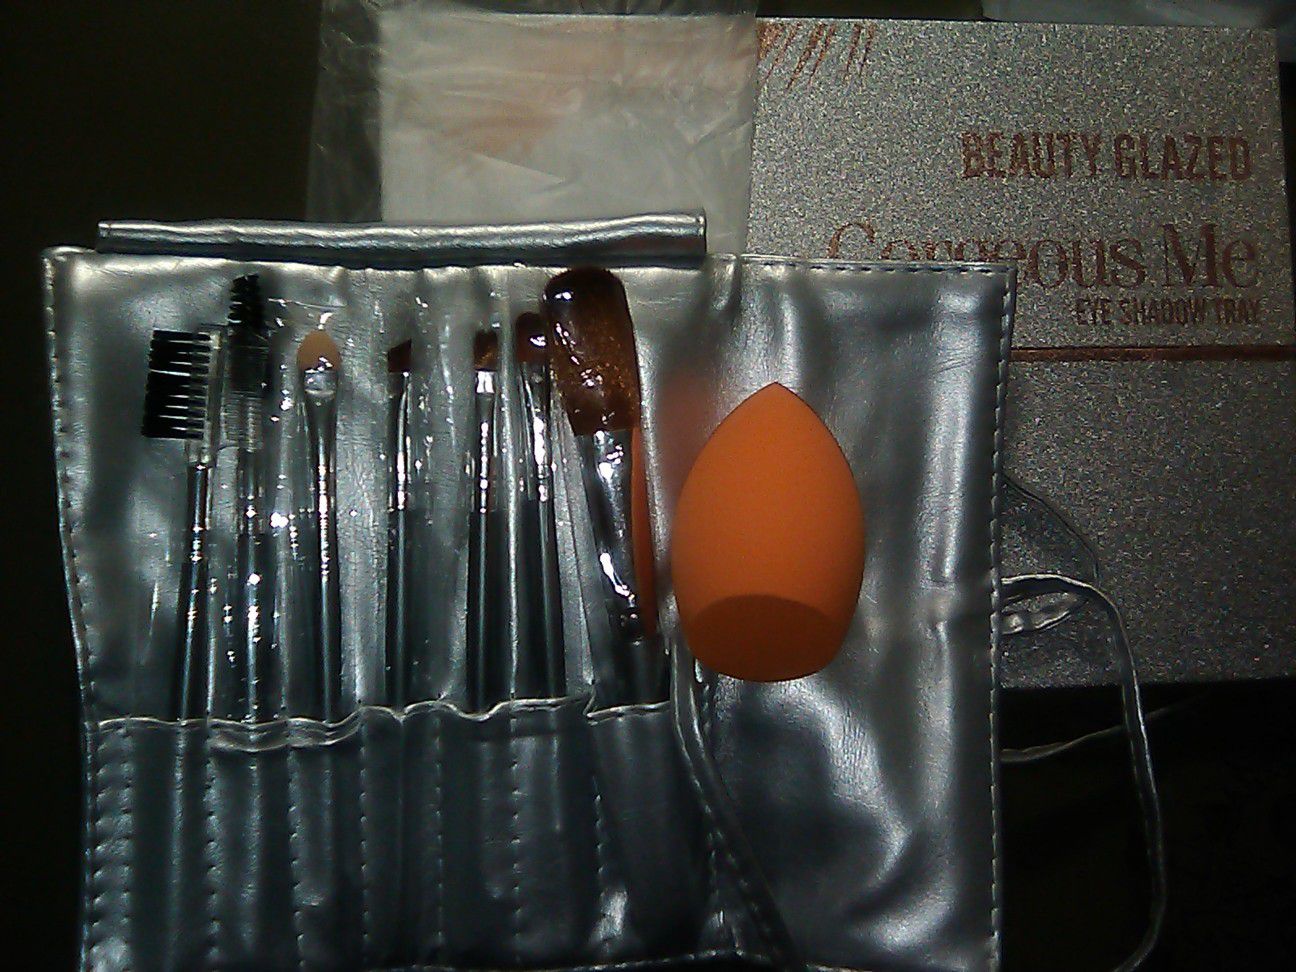 Beauty Glazed Palletts with makeup brushes and beauty blender